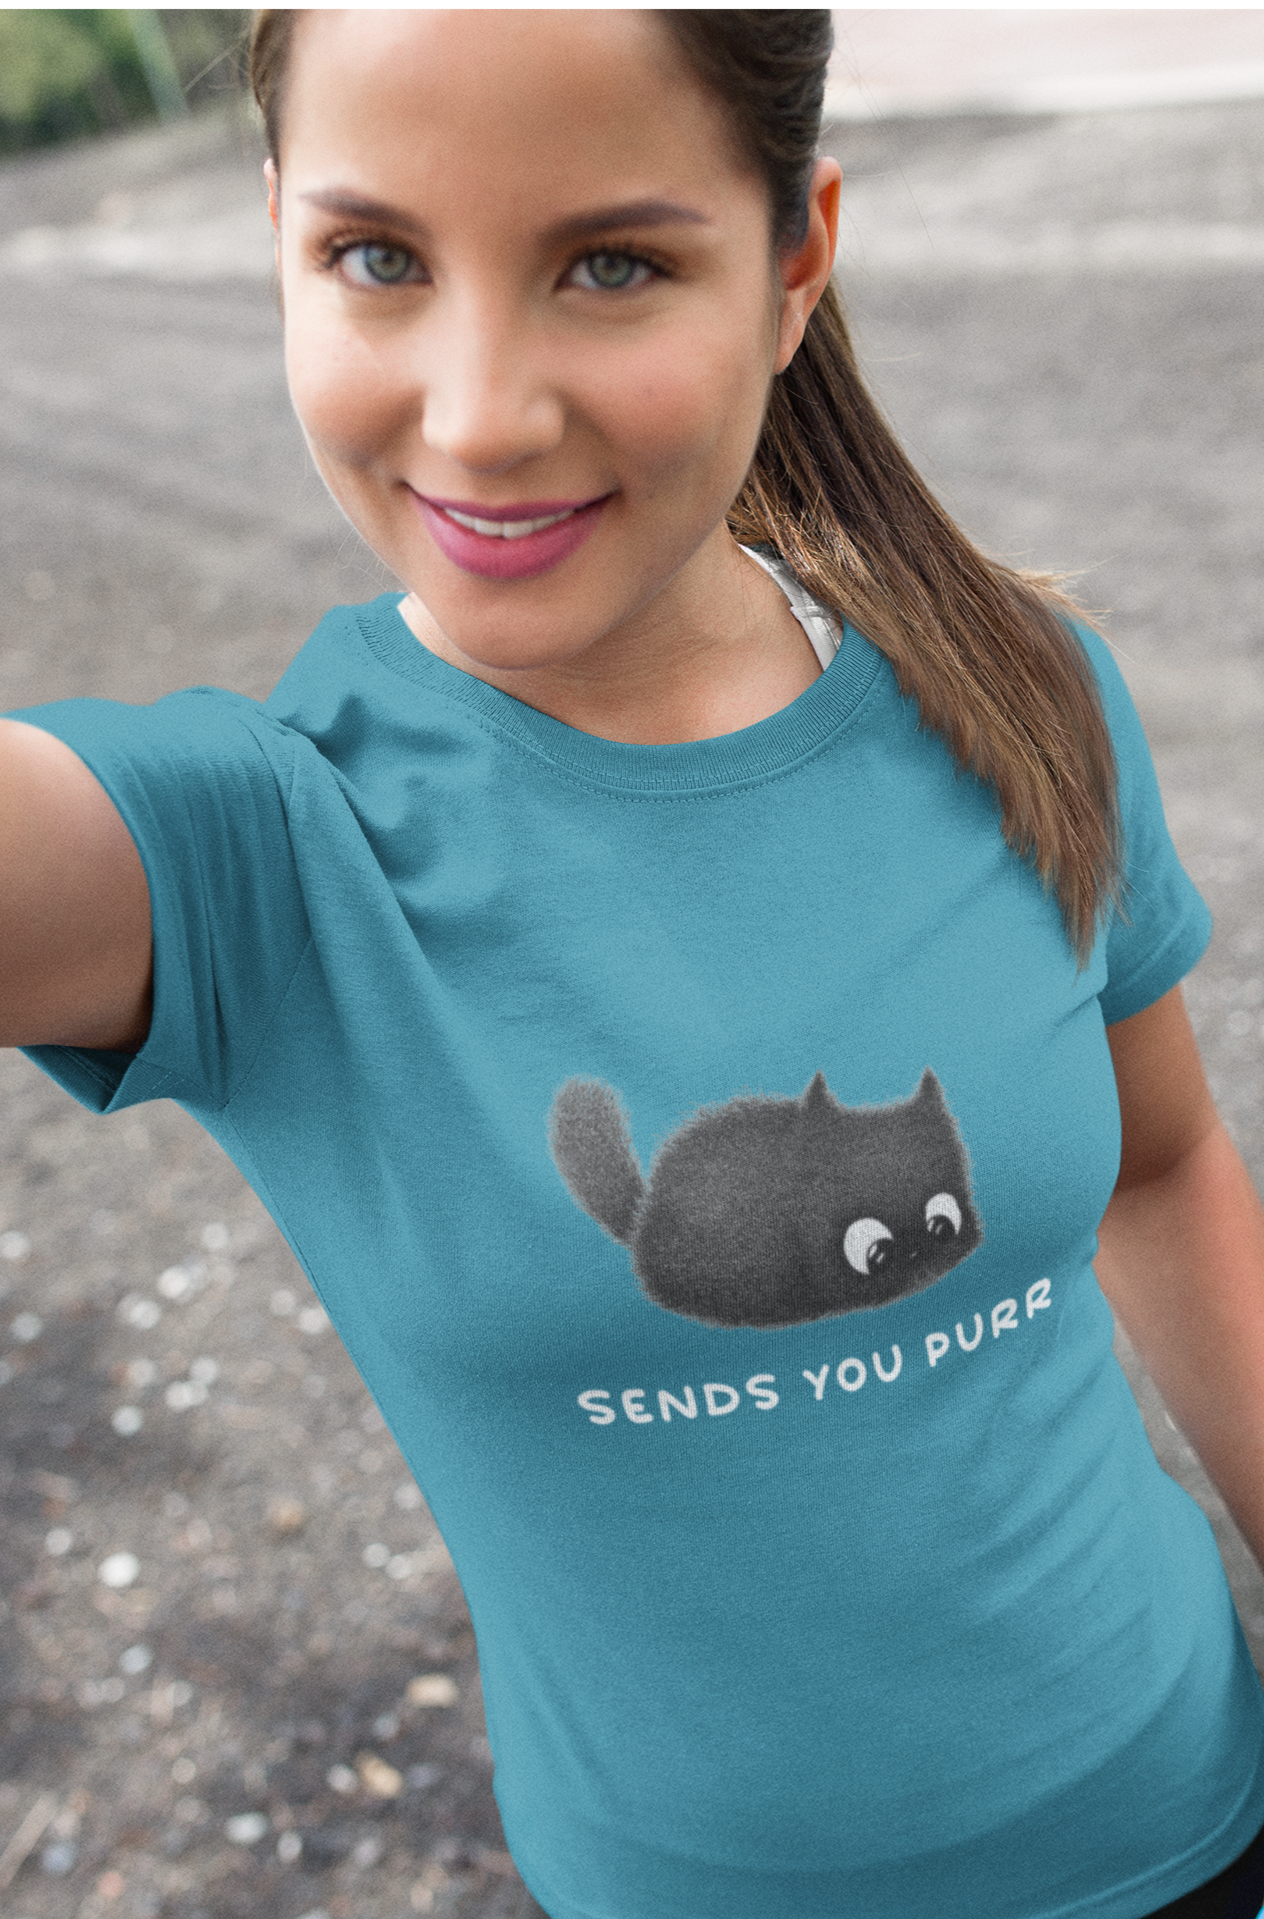 Sends You Purr : Unisex 100% Premium Comfy Cotton T-Shirt by Wholesomememes & Purr In Ink